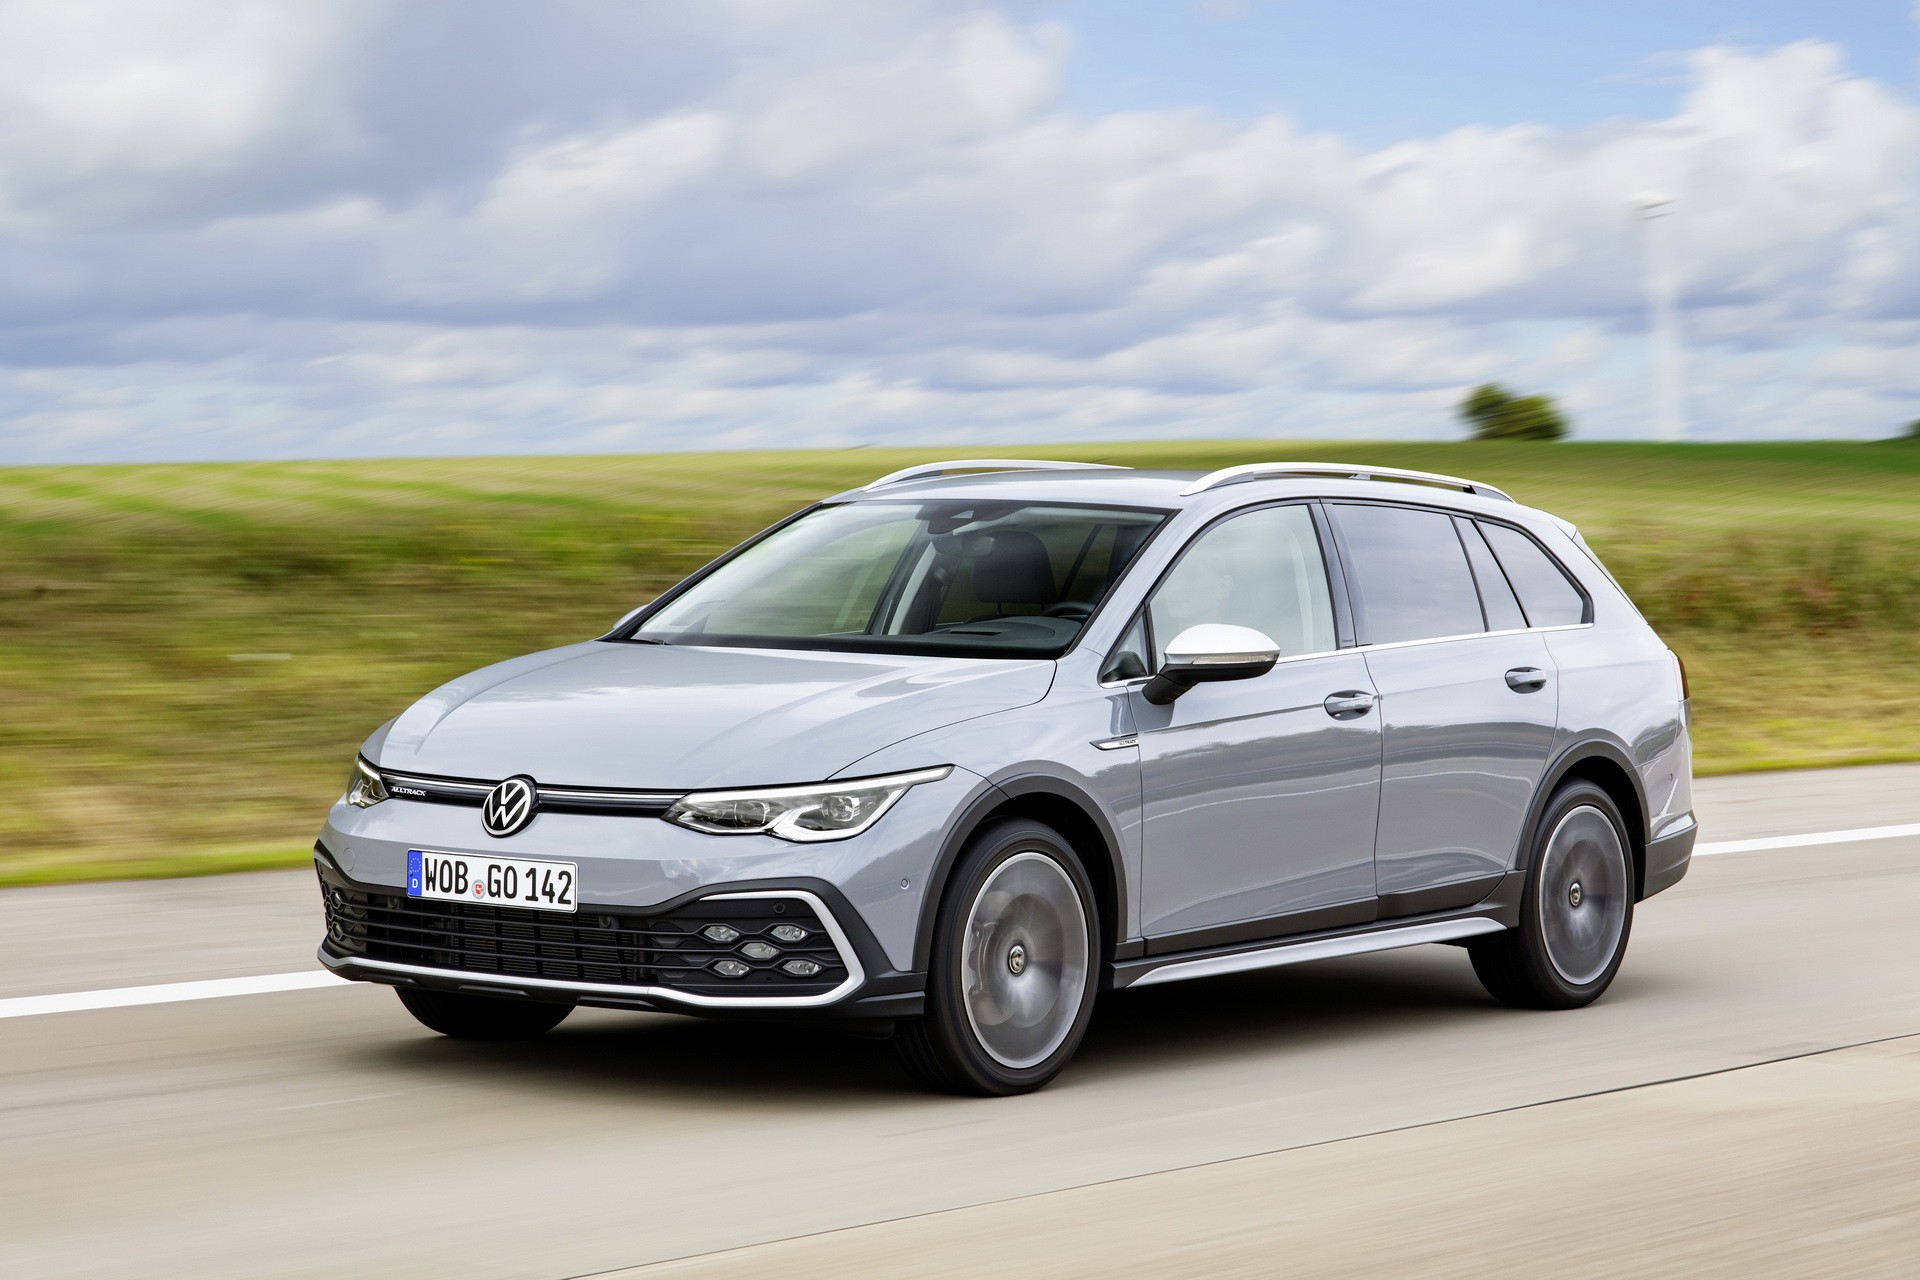 2021 Volkswagen Golf Wagon Launched in the UK, Alltrack Has 197 HP 2.0